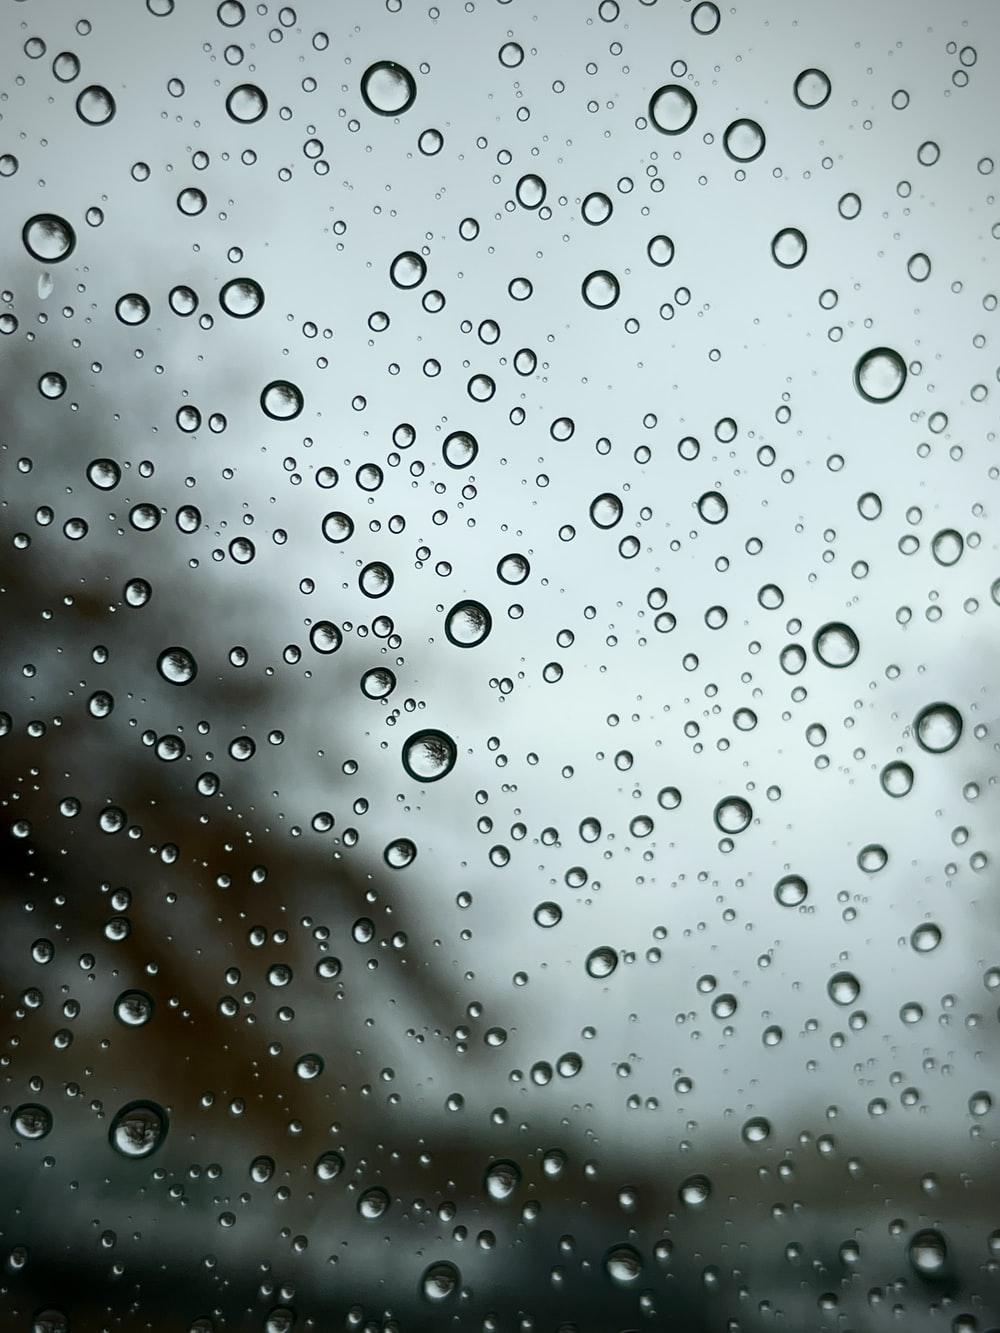 Rain Droplets Wallpapers - Top Free Rain Droplets Backgrounds ...